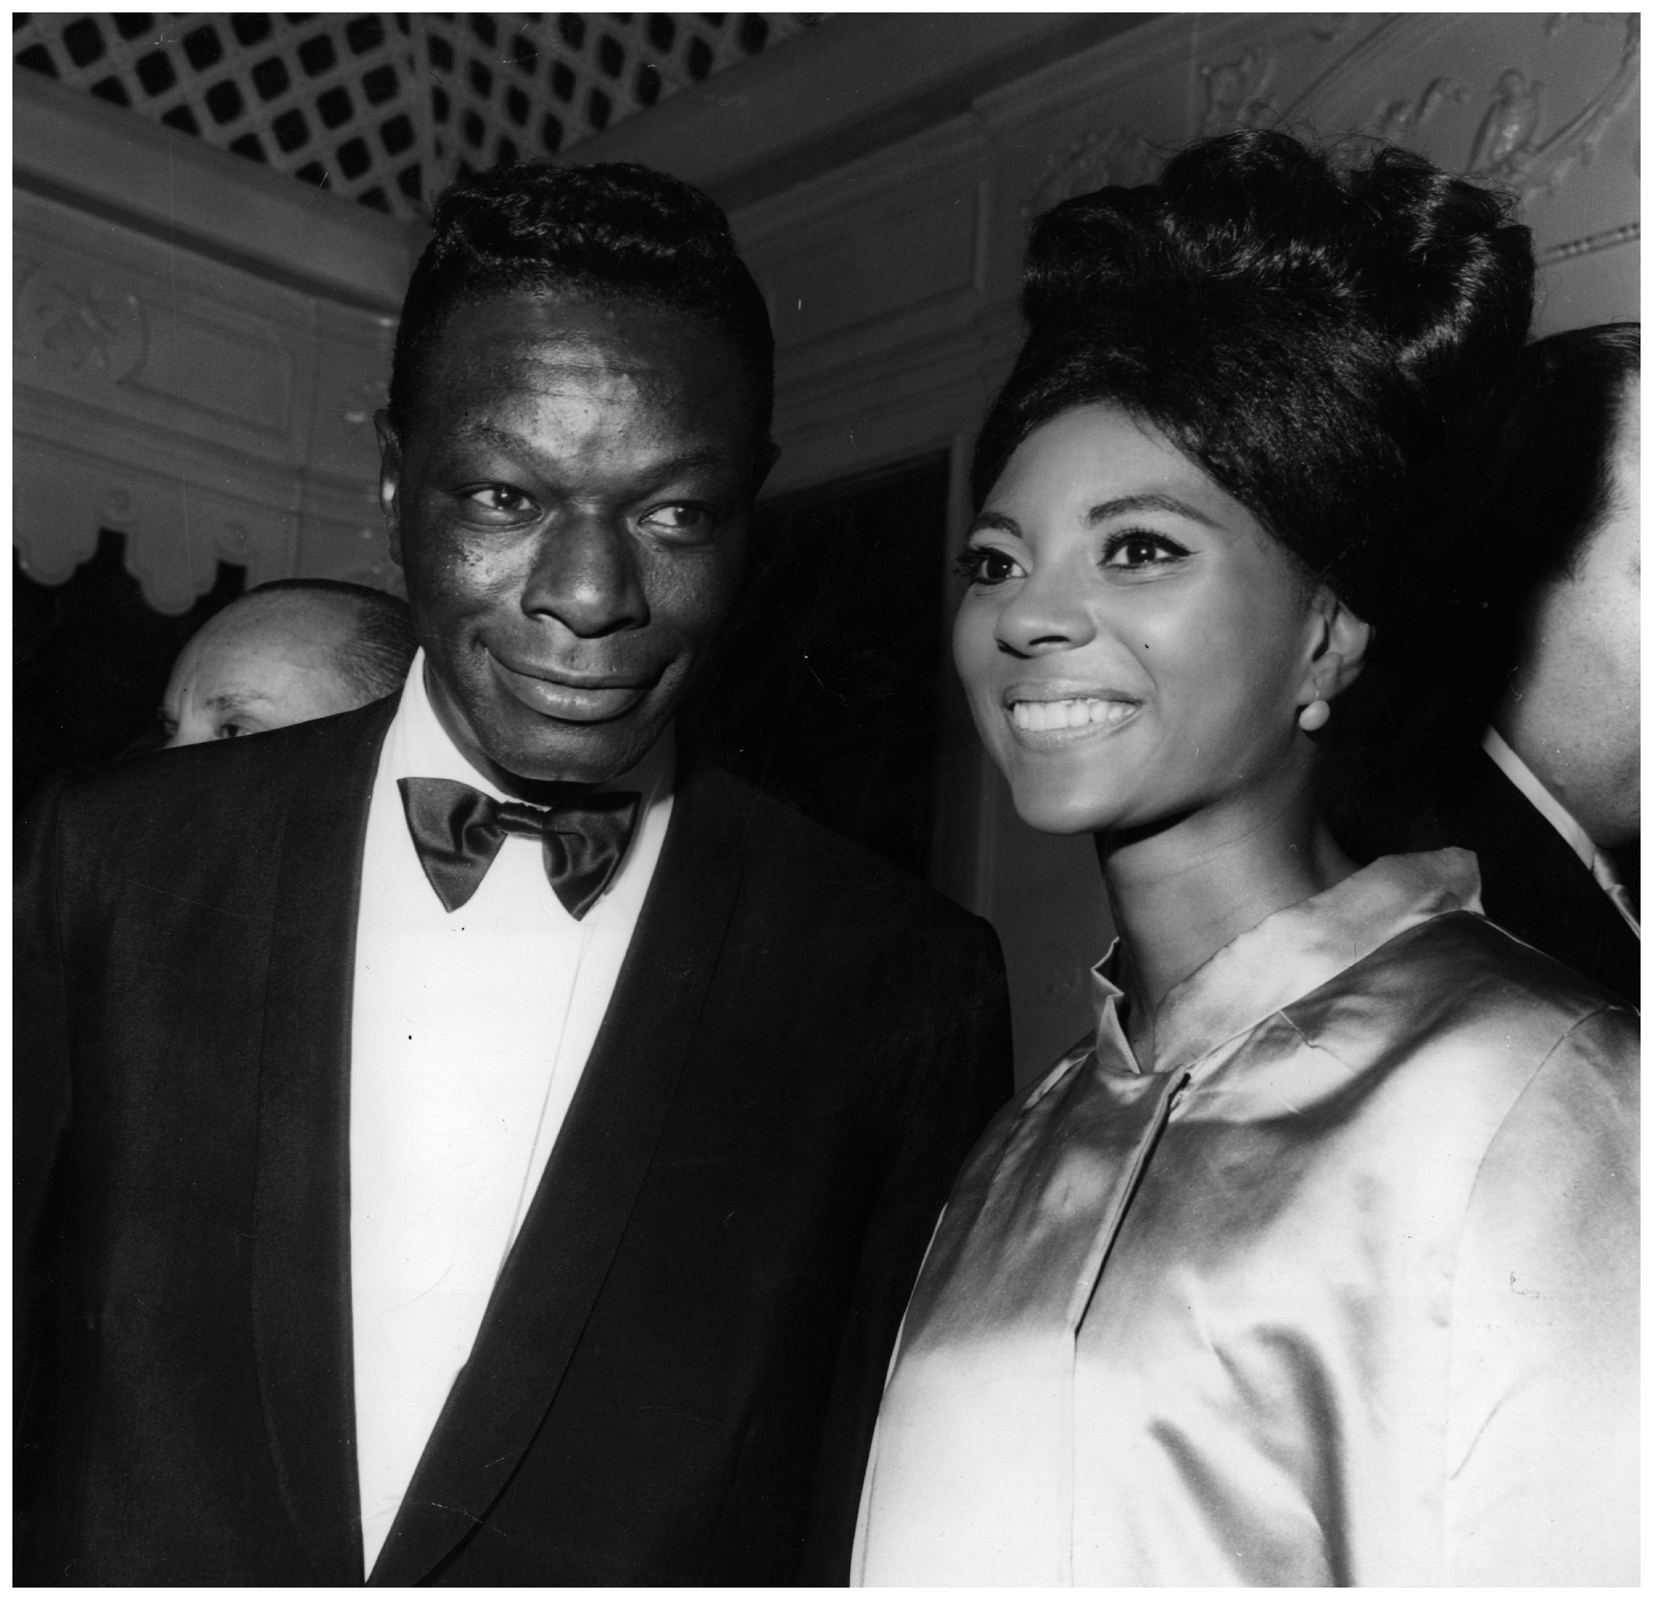 https://jazzinphoto.files.wordpress.com/2013/10/american-singer-nat-king-cole-wishes-leslie-uggams-star-of-the-mitch-millar-tv-show-good-luck-at-her-debut-at-cocoanut-grove-hollywood-1963.jpg